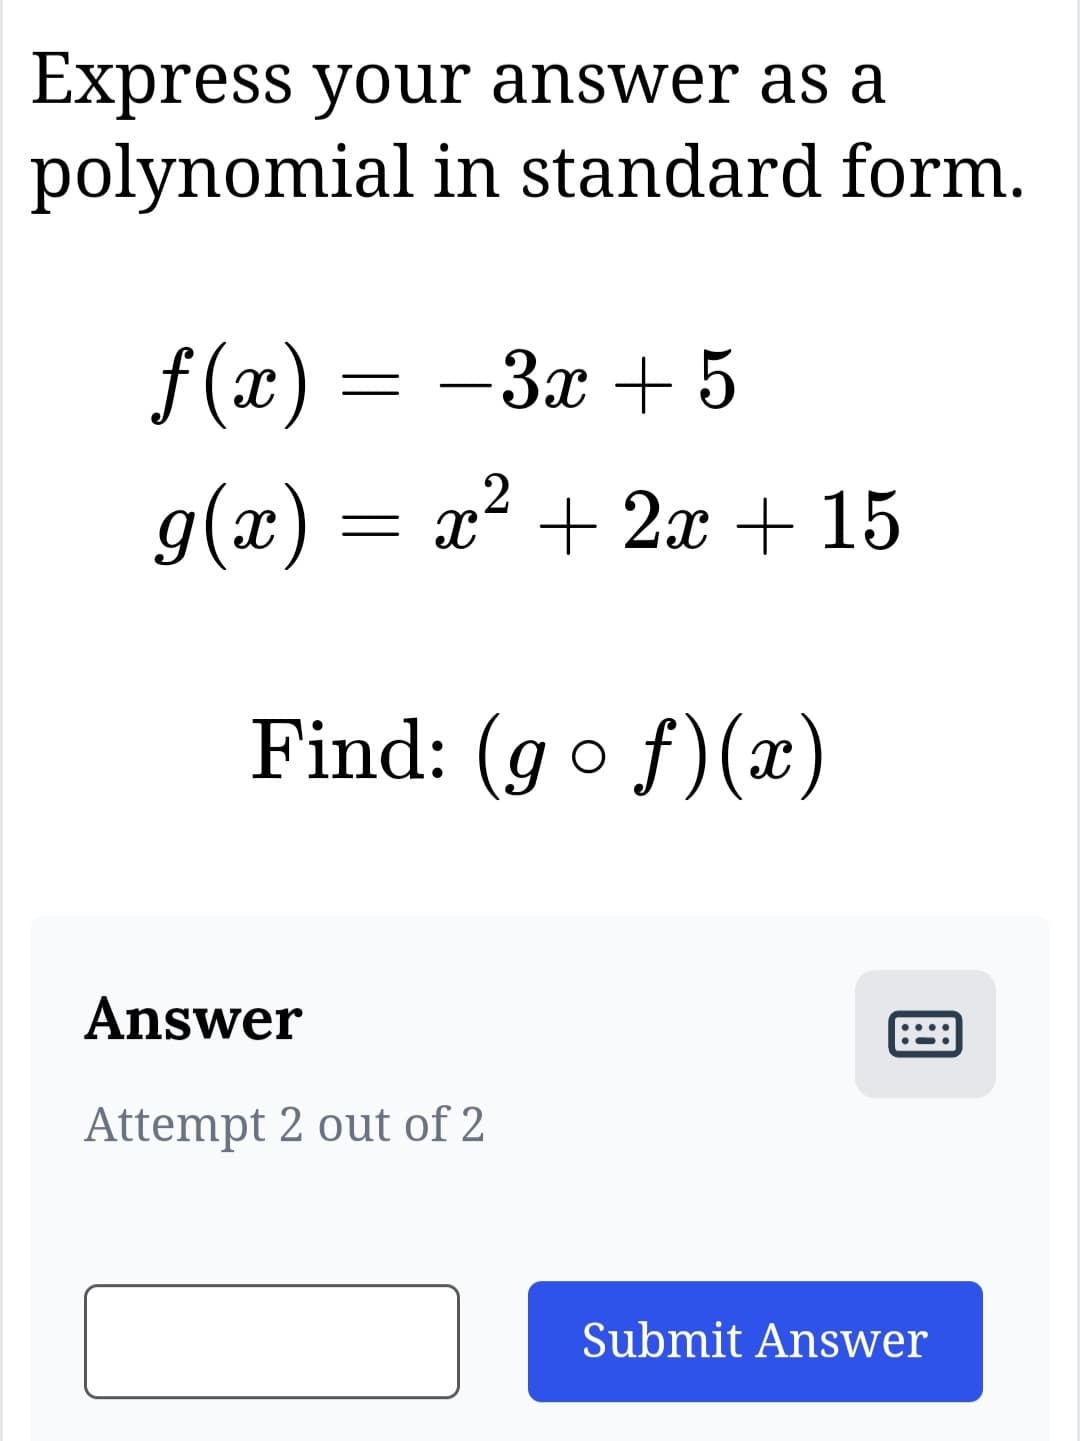 Express your answer as a
polynomial in standard form.
f(x) = -3x+5
g(x) = x² + 2x + 15
Find: (gof)(x)
Answer
Attempt 2 out of 2
Submit Answer